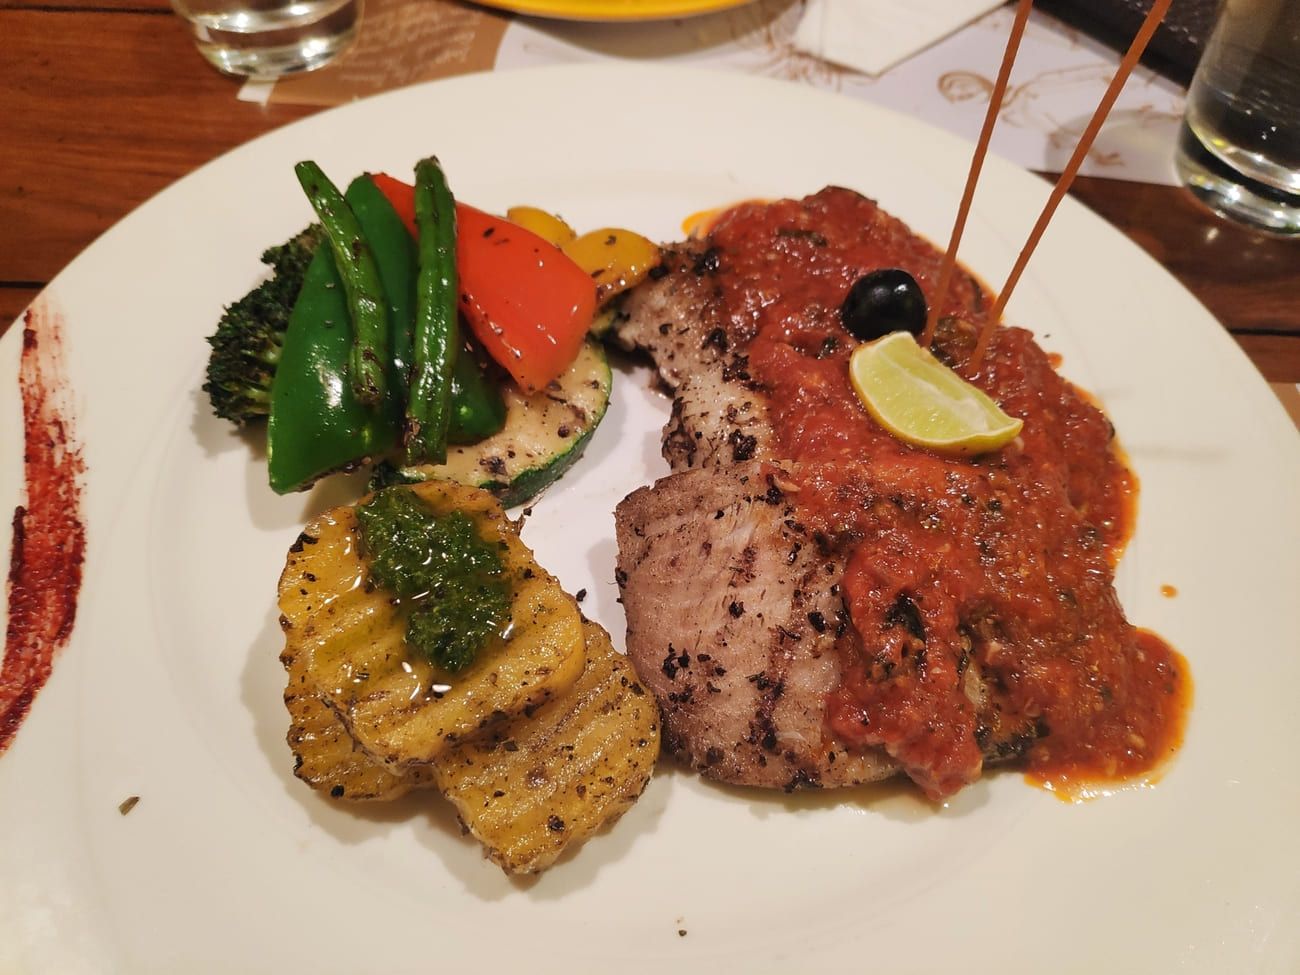 Tasty grilled fish with a peri-peri sauce and vegetables at the Tonino Restaurant, Connaught Place, New Delhi 